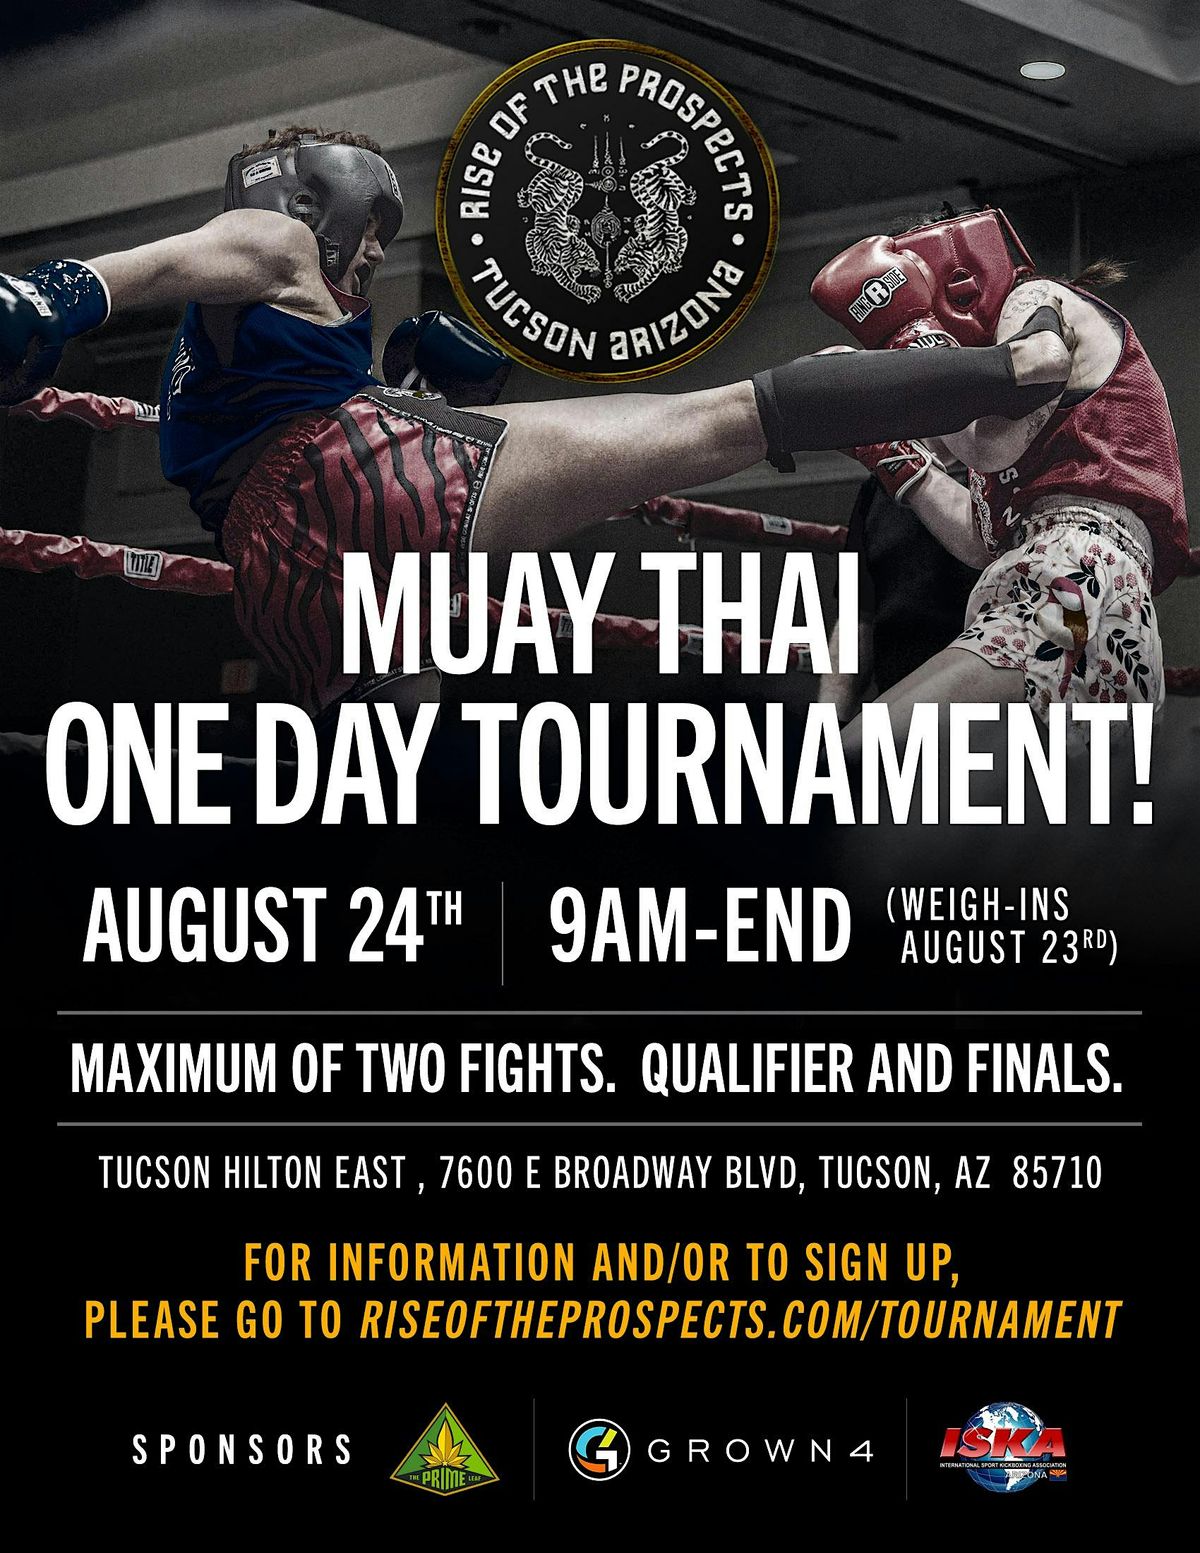 Rise of the Prospects Muay Thai Tournament